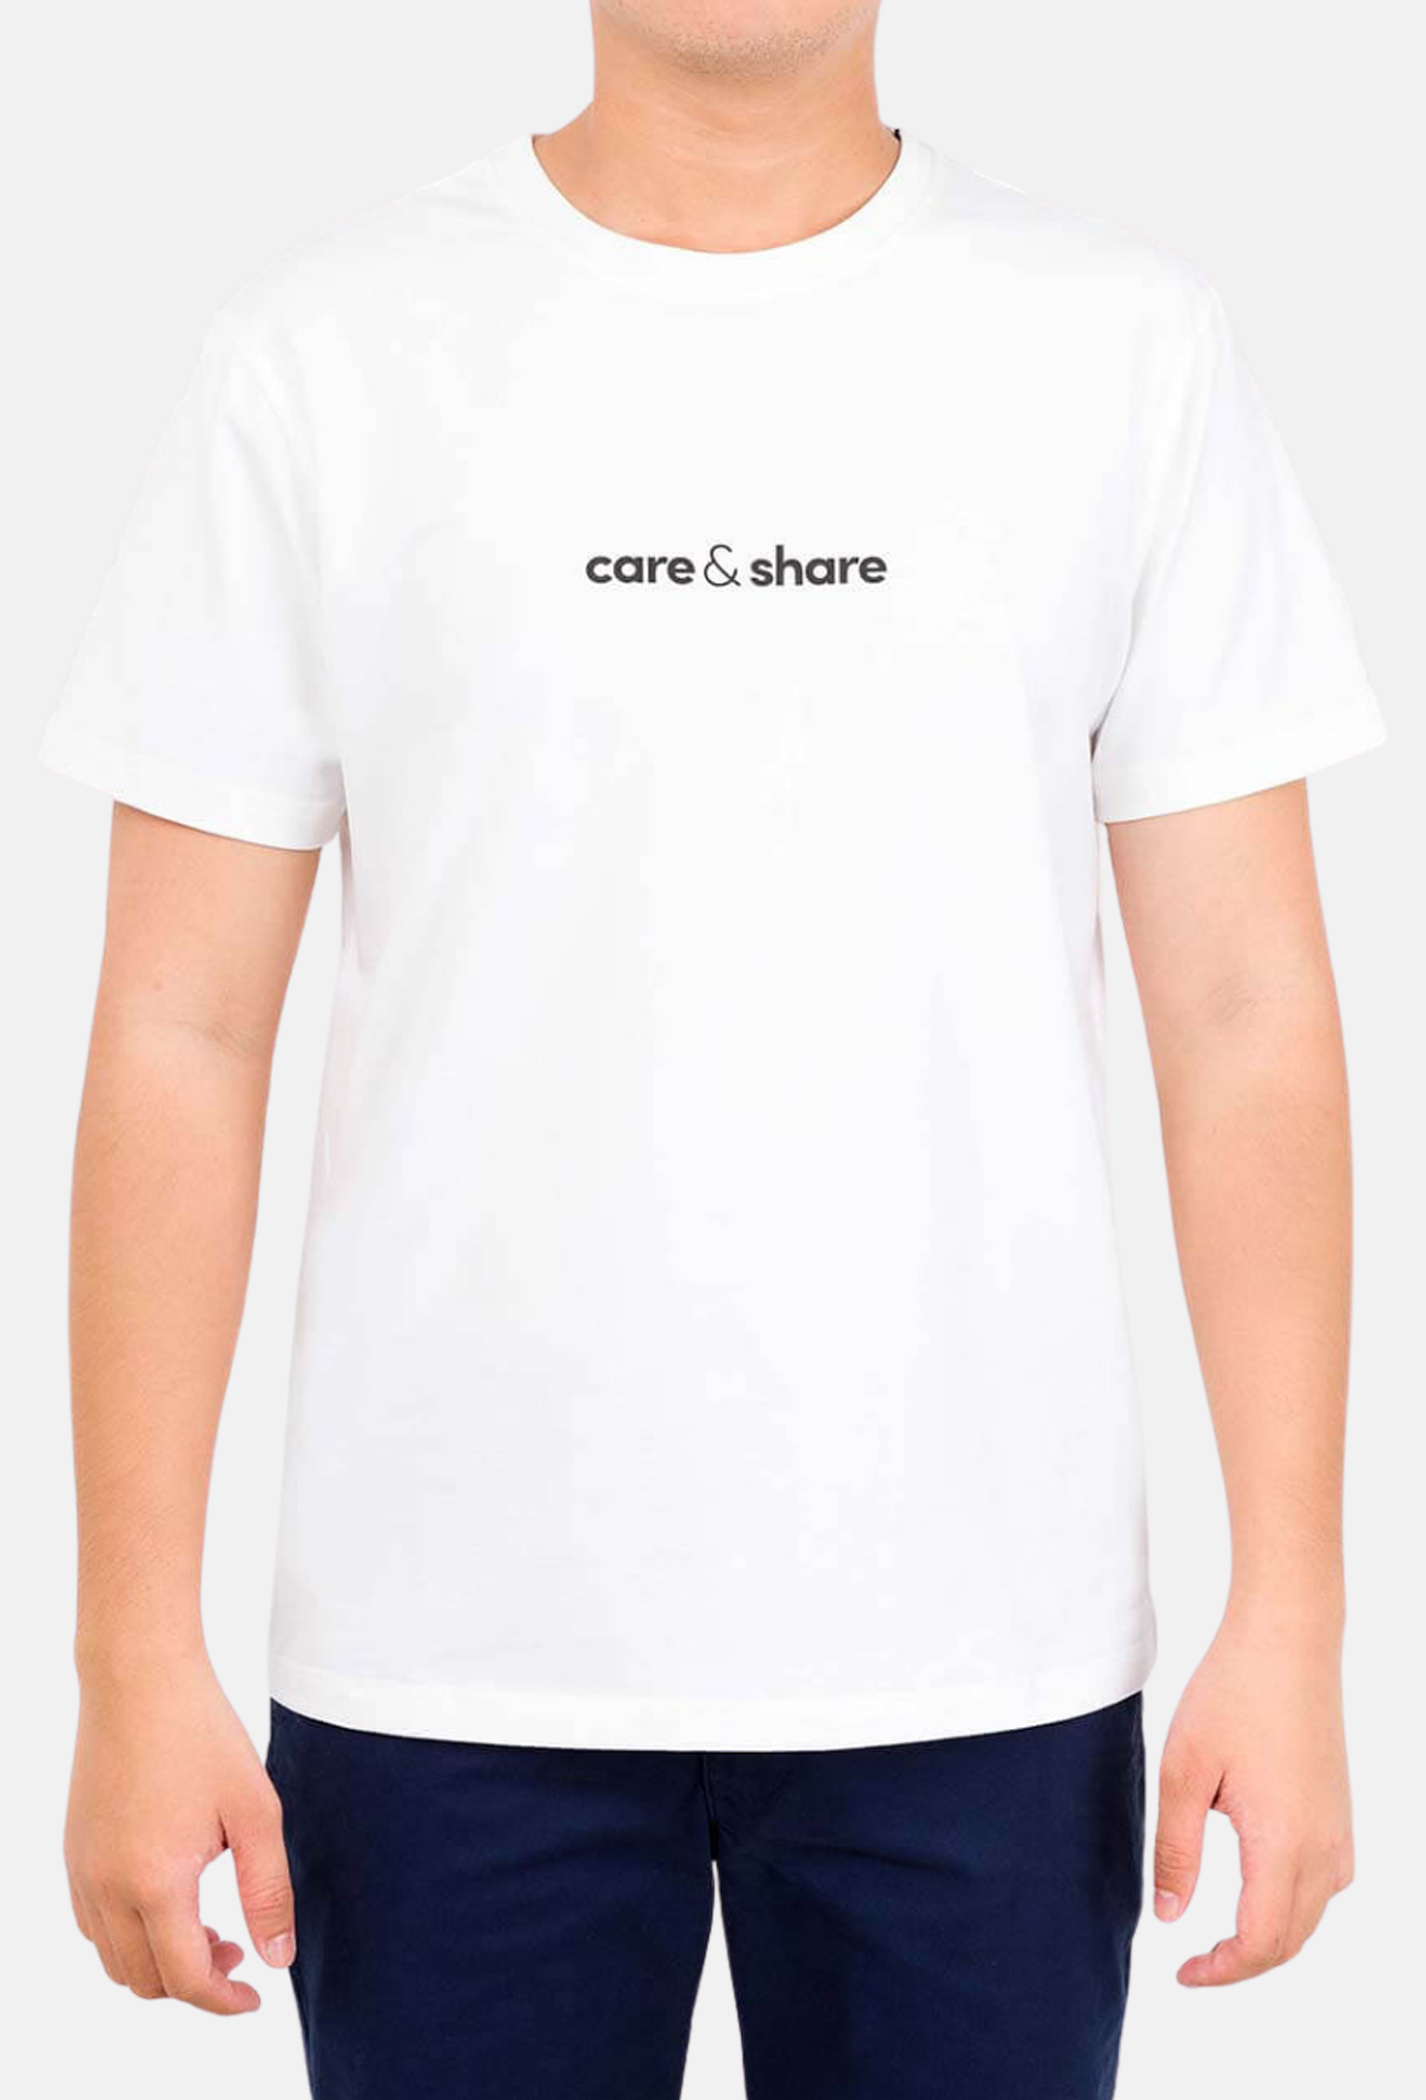 T-Shirt Care & Share in giữa  1